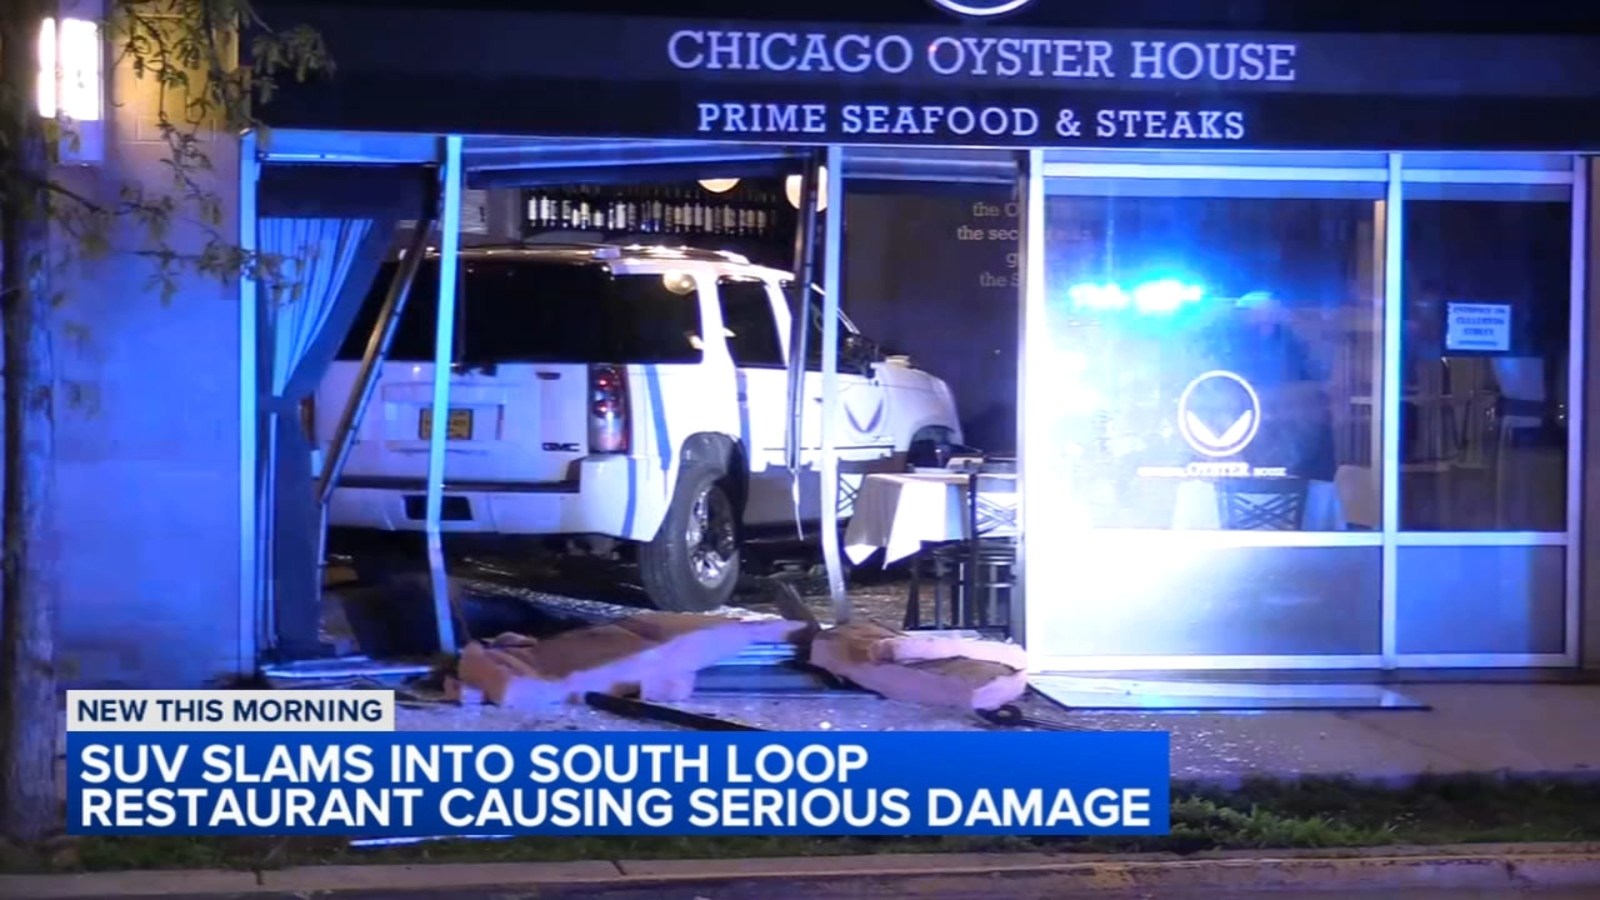 SUV crashes into Chicago Oyster House restaurant in South Loop causing extensive damage, CPD says [Video]